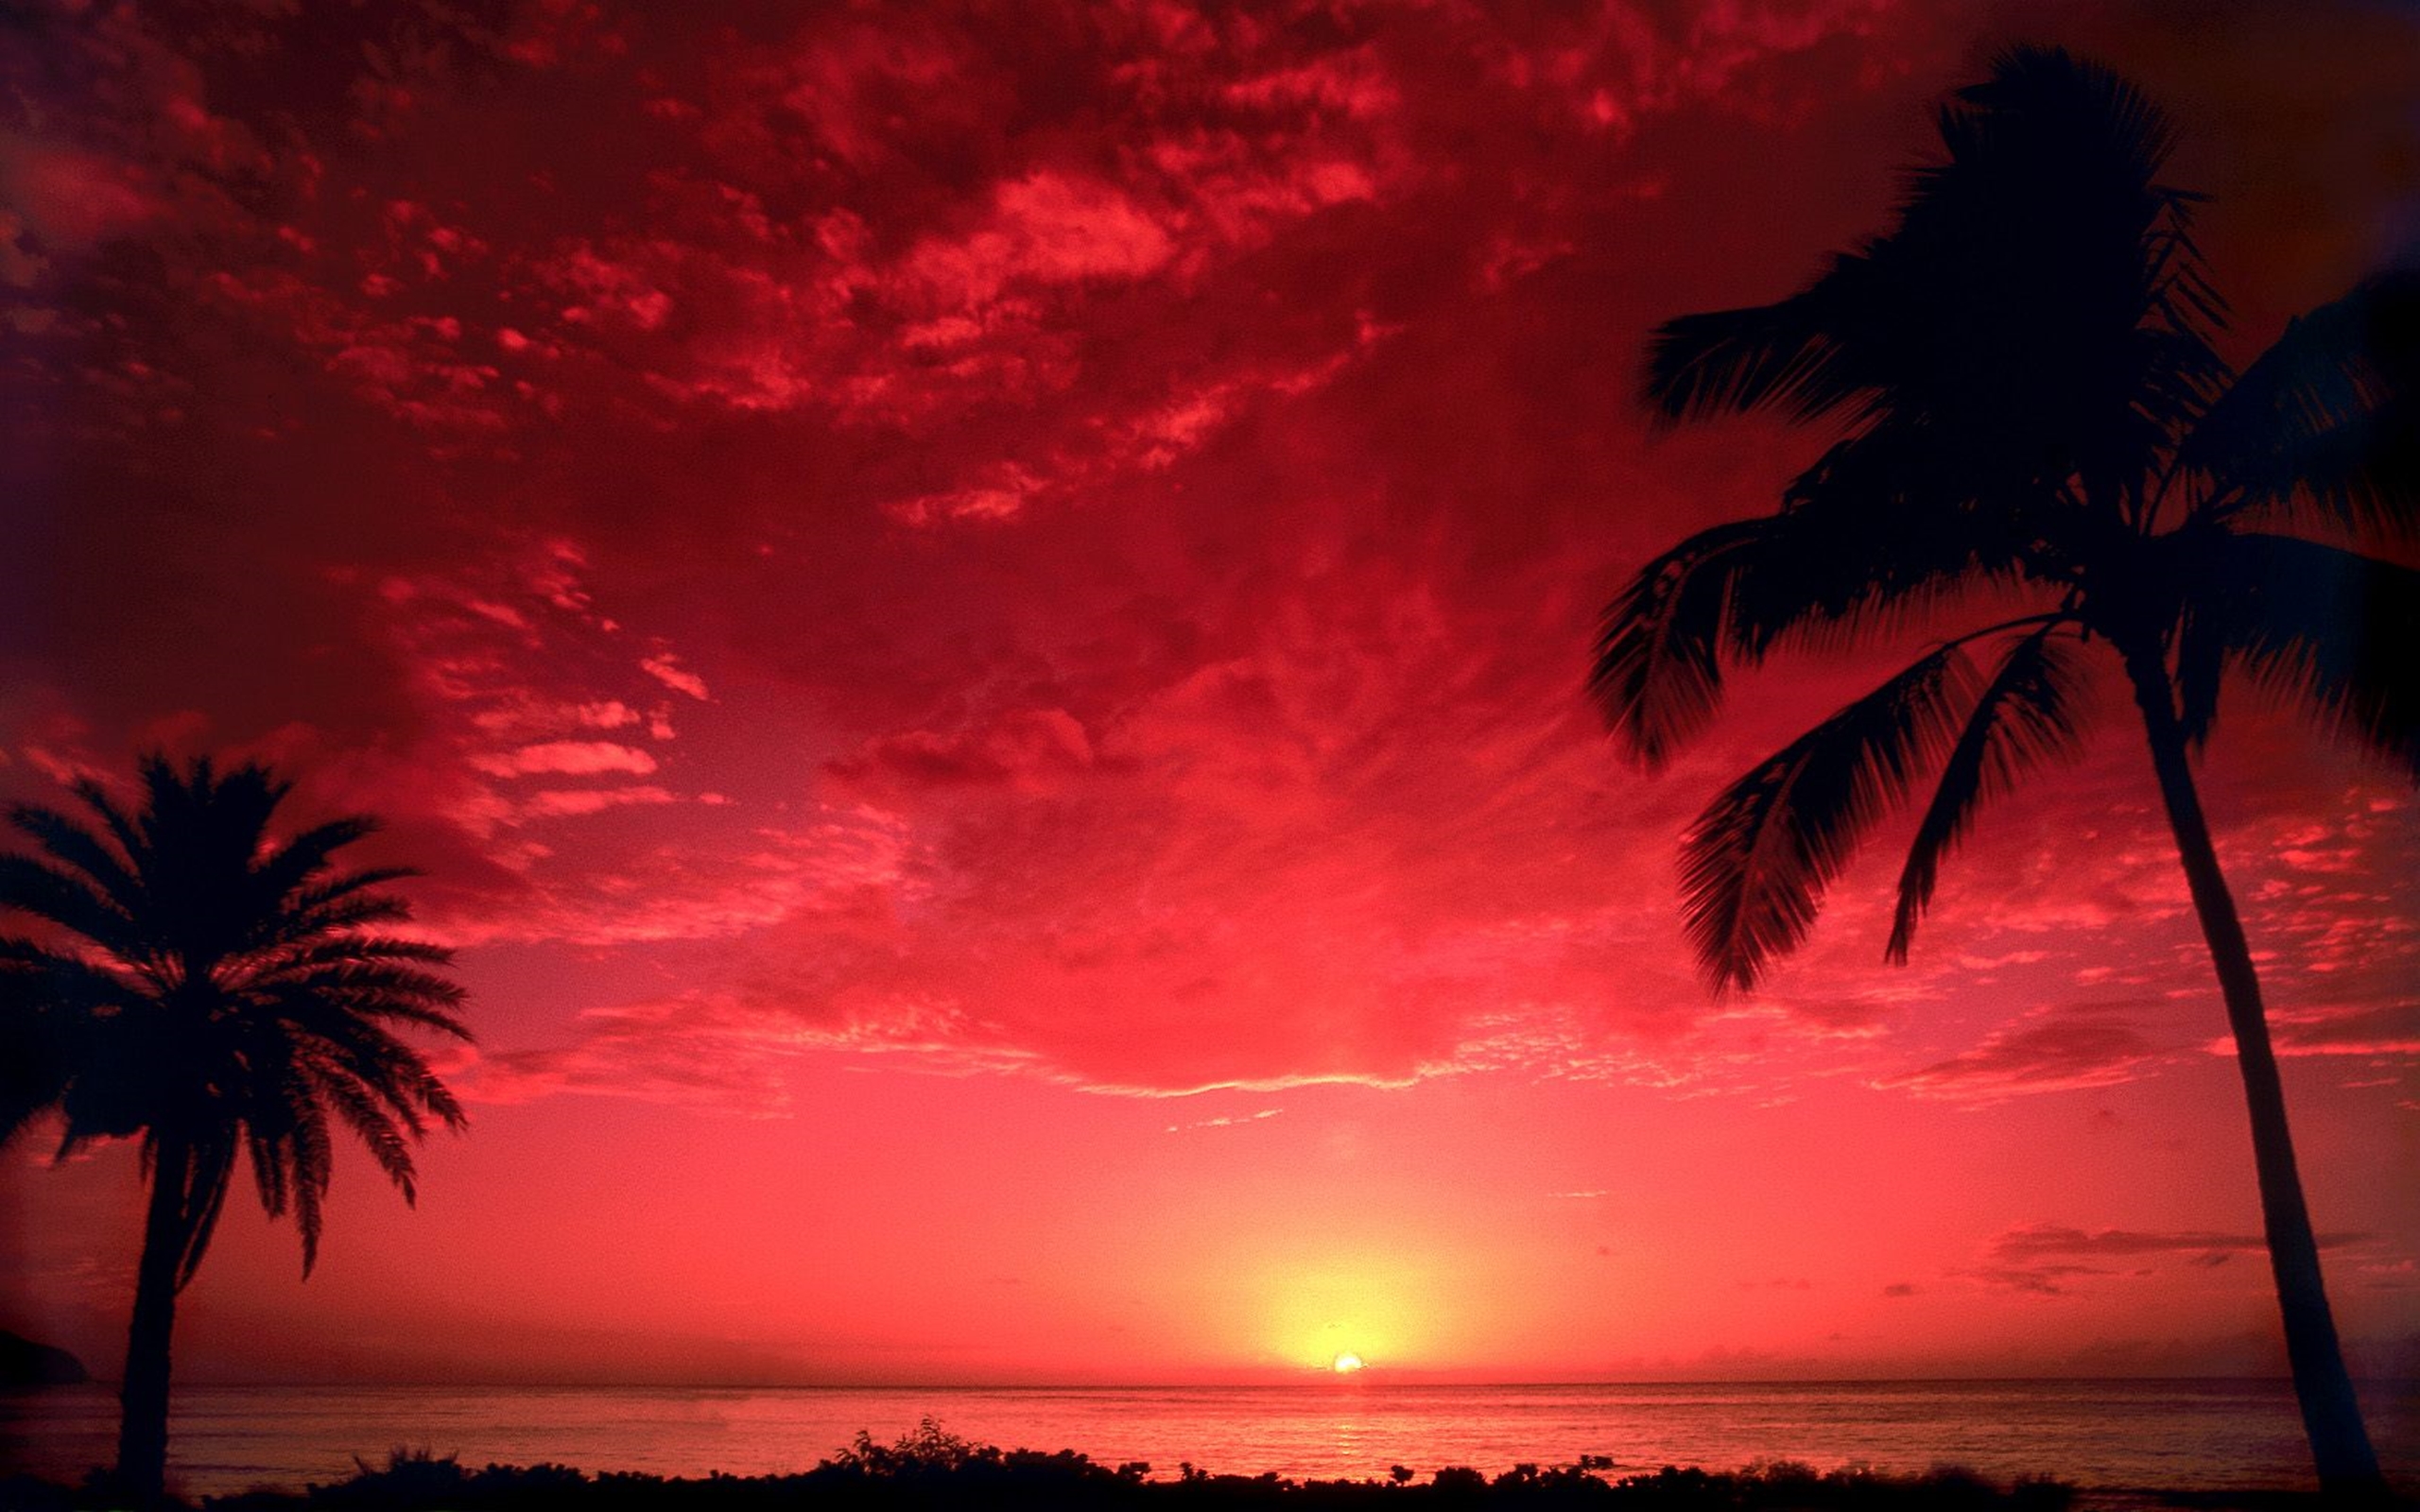 Earth Horizon Palm Tree Red Silhouette South Pacific Sunset Tropical 2560x1600